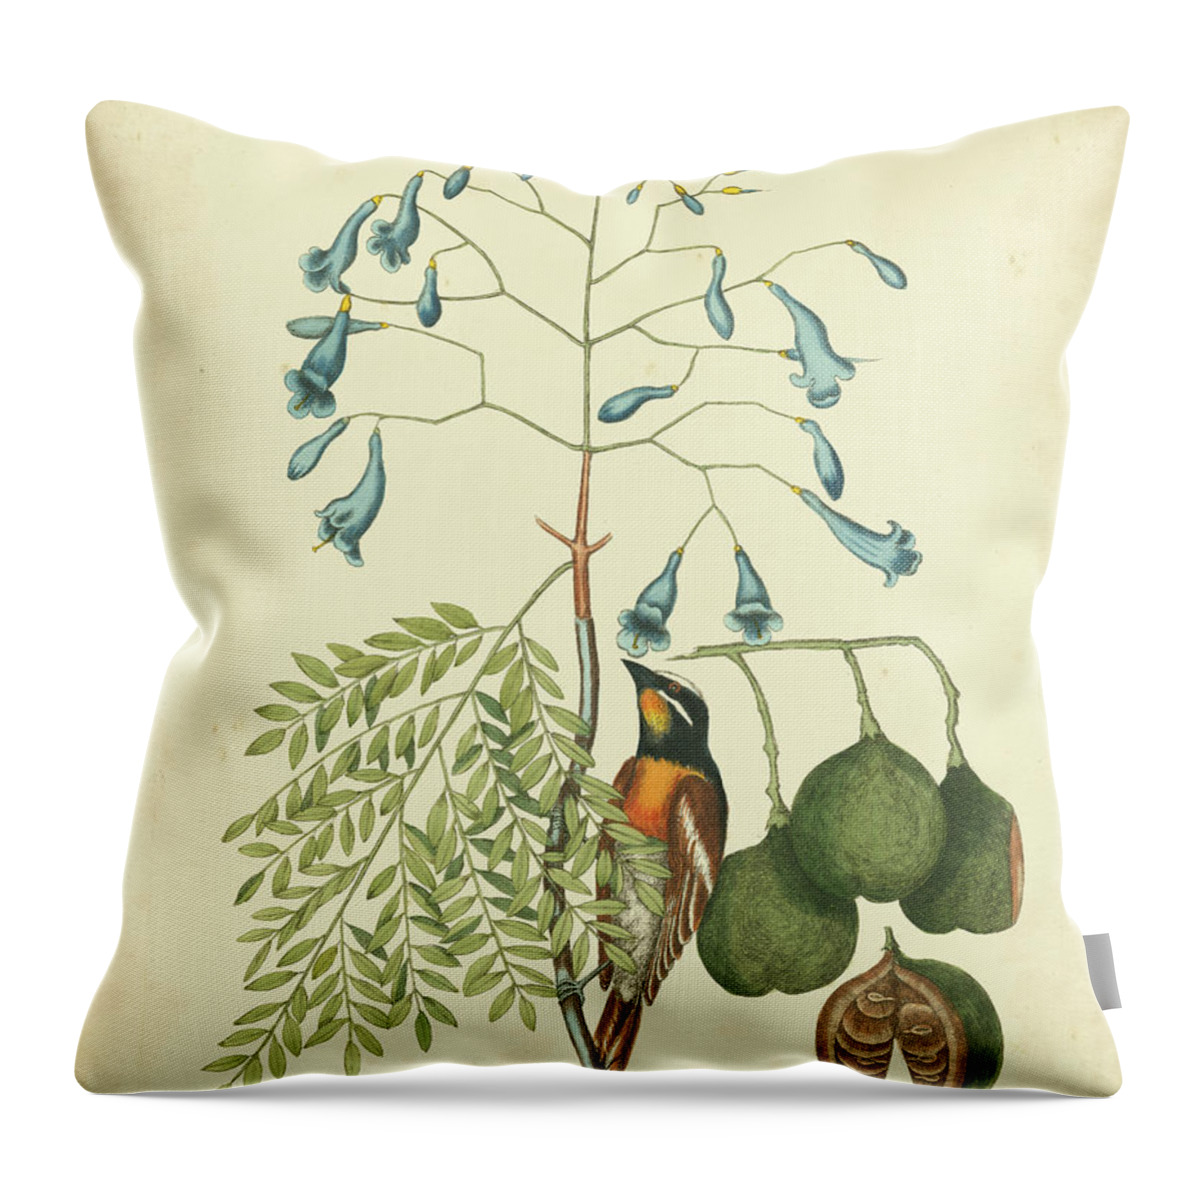 Animals Throw Pillow featuring the painting Catesby Bird & Botanical II by Mark Catesby